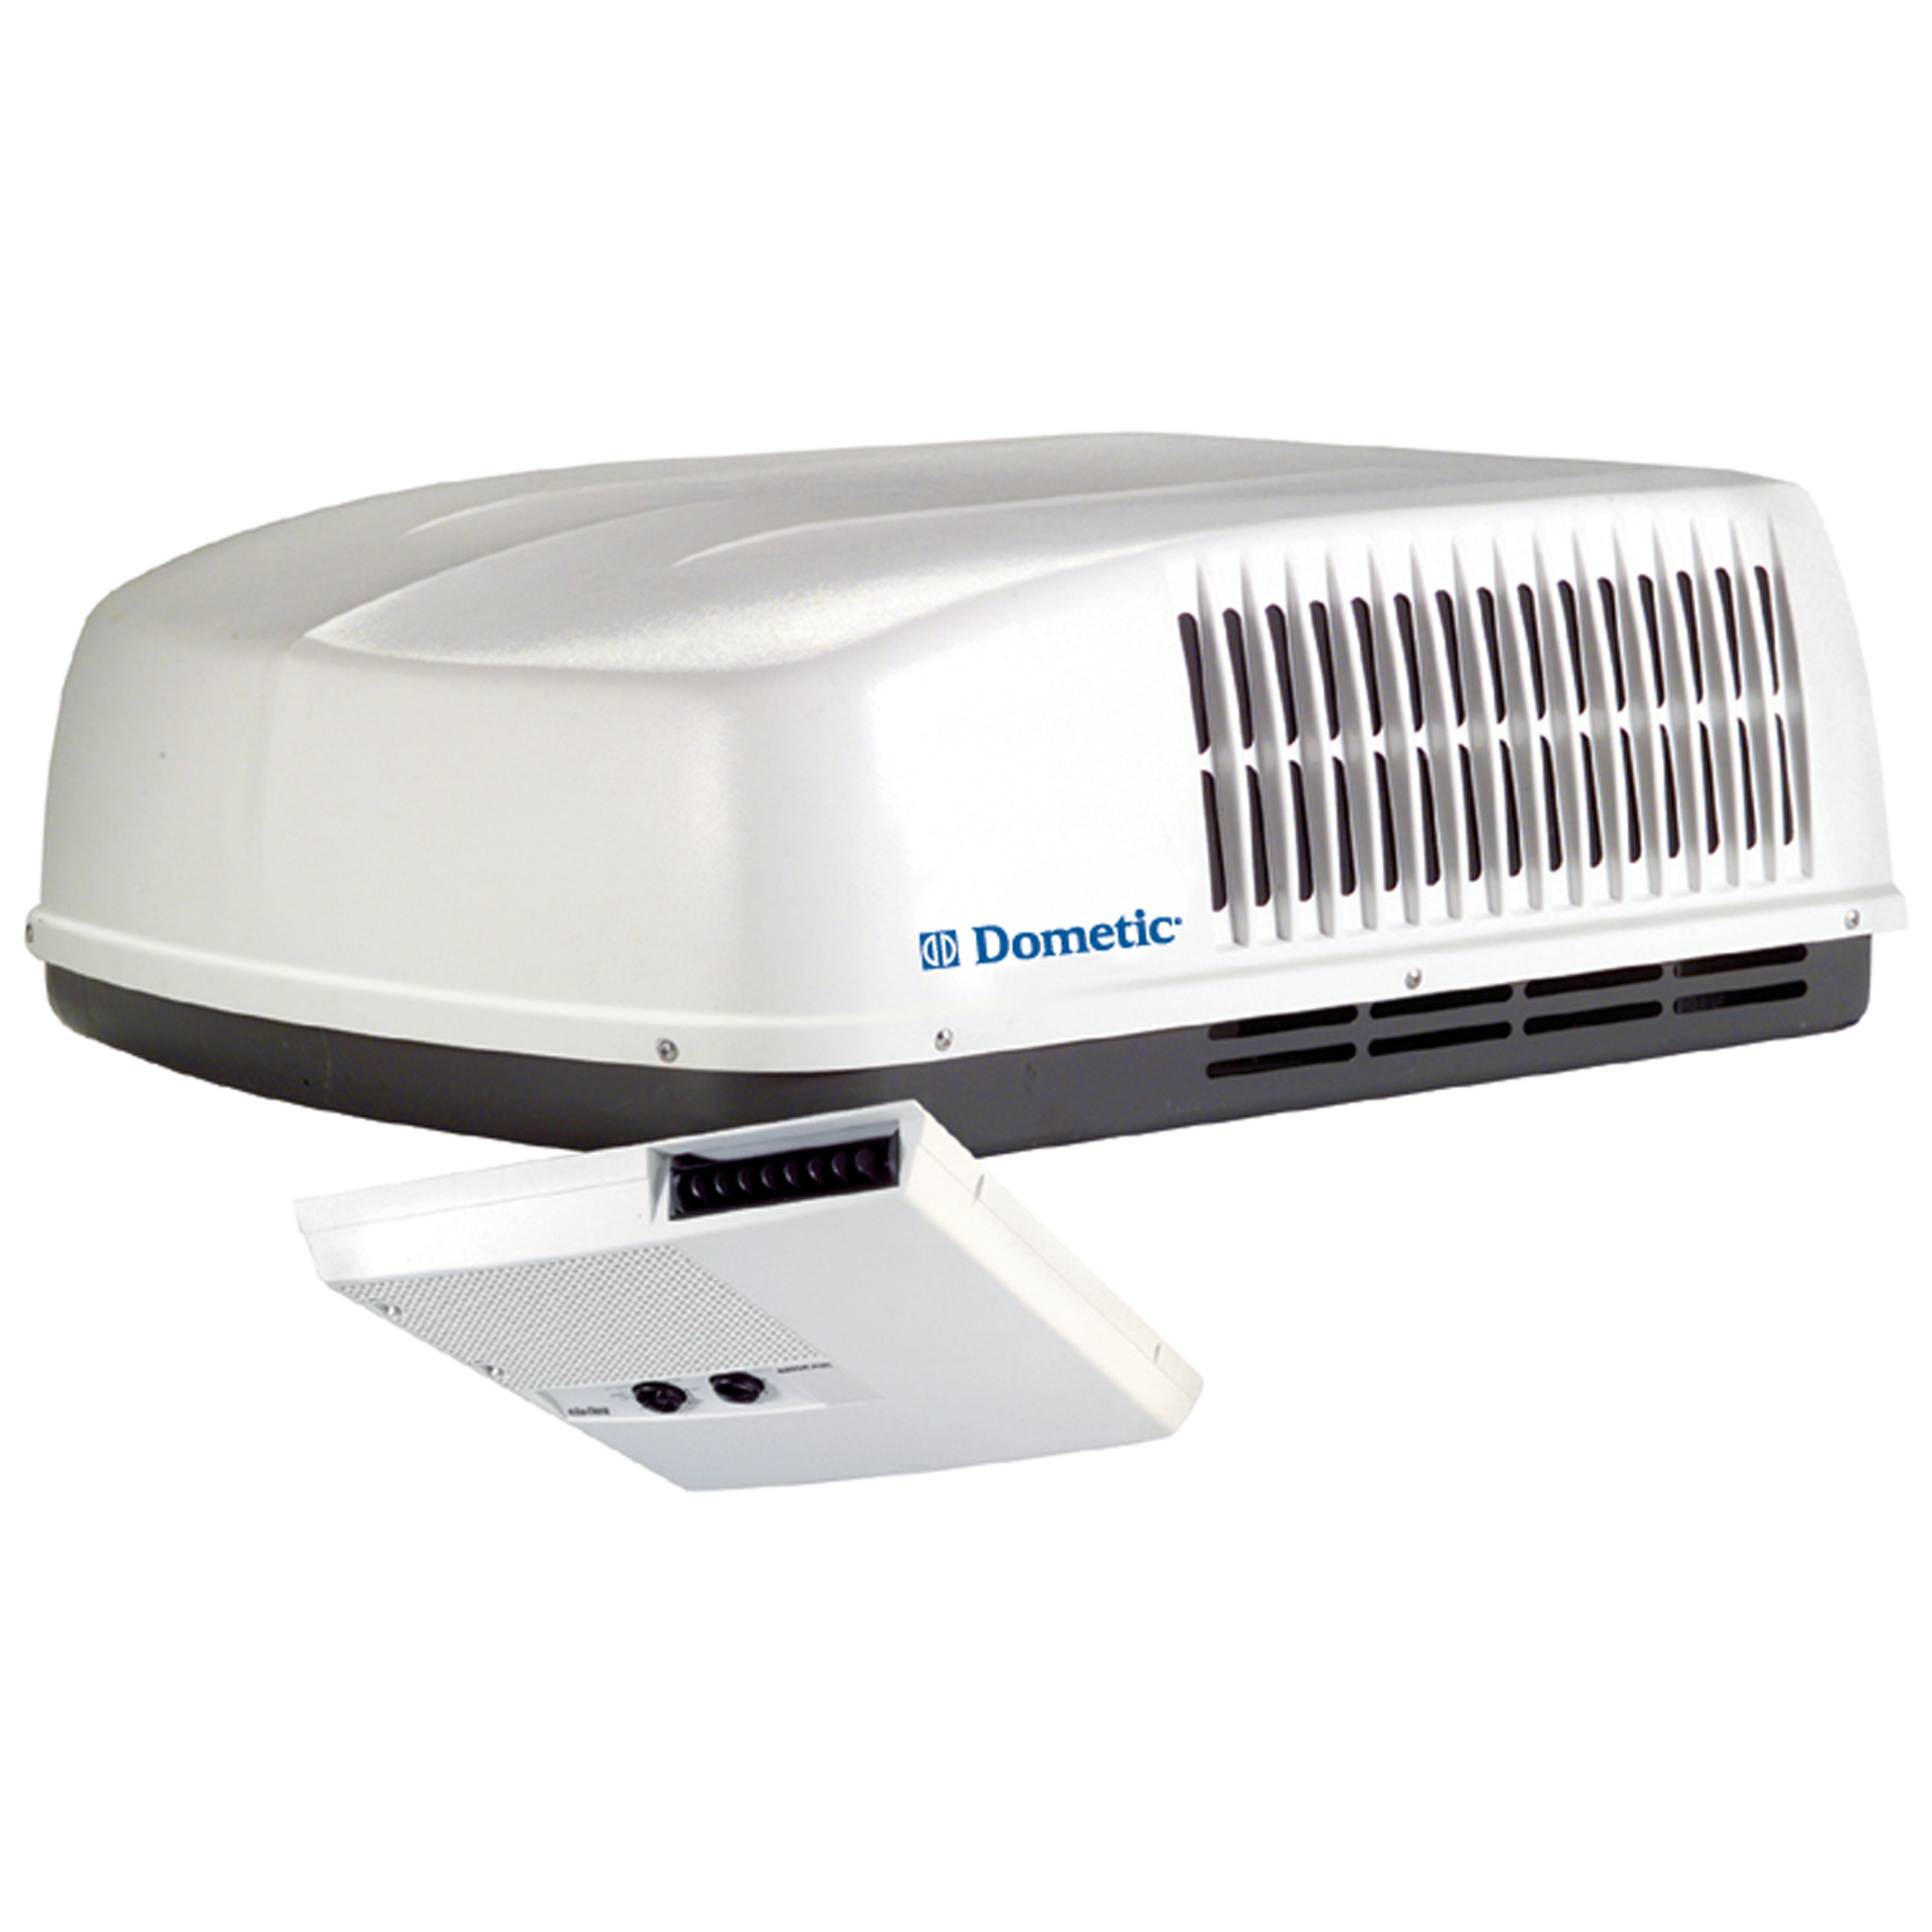  Dometic  Air Conditioners  477915AXX1C0 Brisk Air 13 5 Cg Pw 